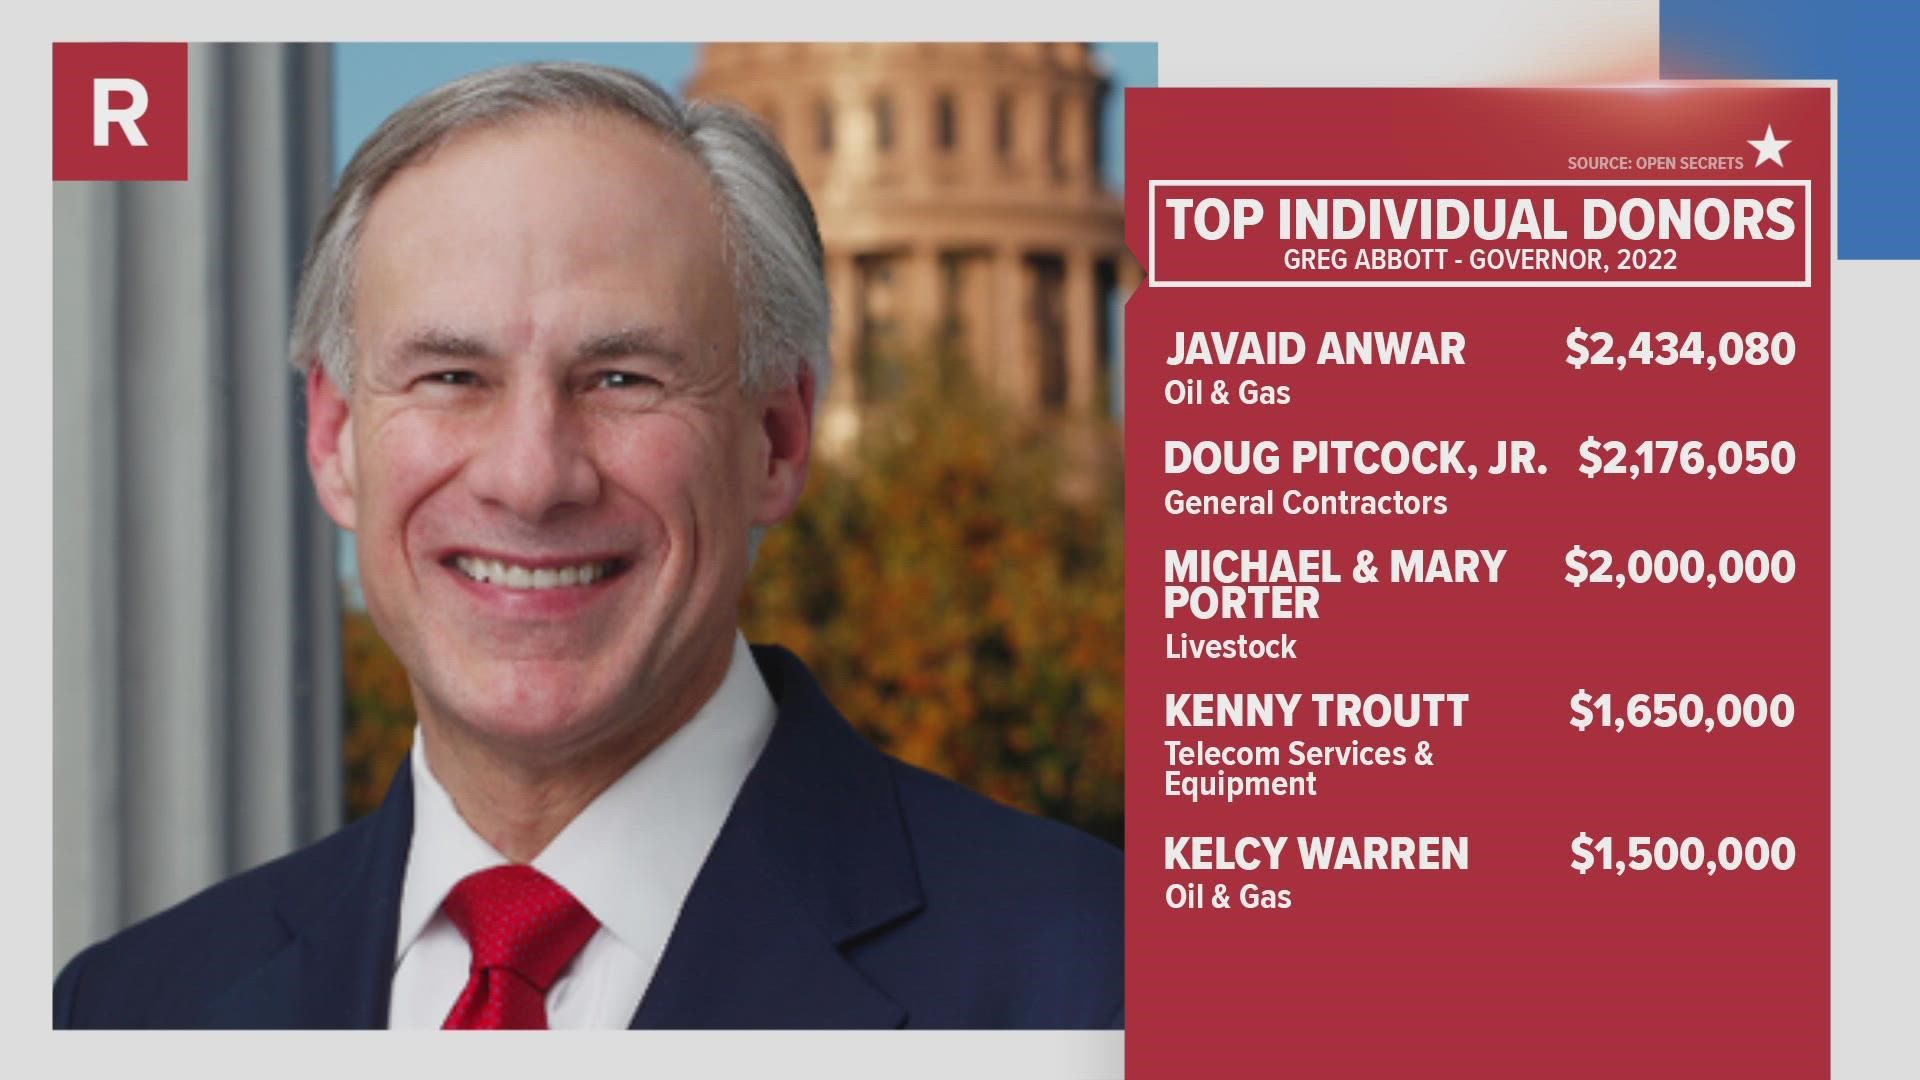 KVUE looked at who is giving the most to the state's top candidates. Here are the totals for the governor's race.